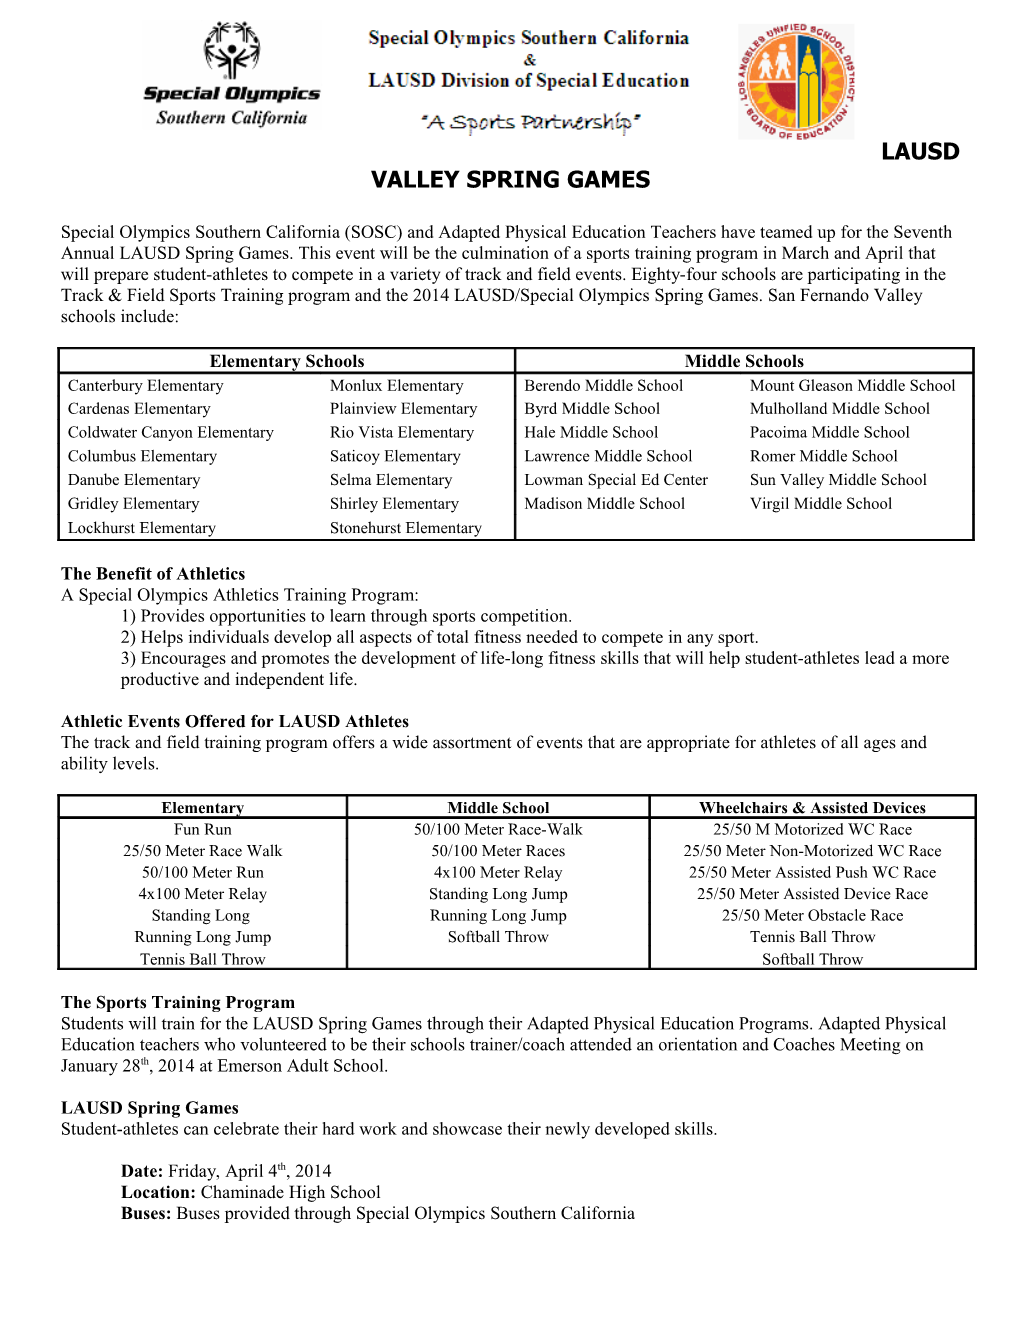 Lausd Valley Spring Games